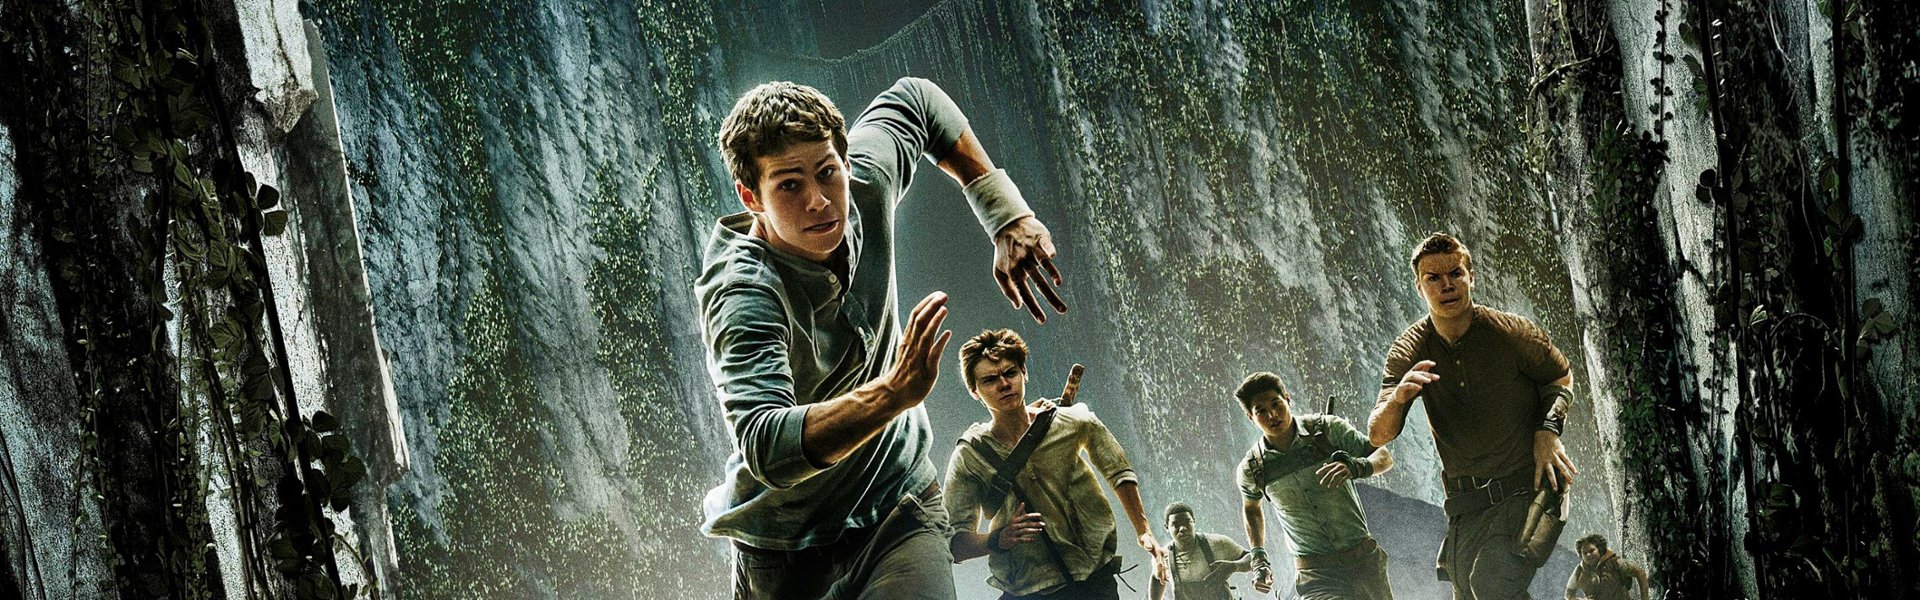 There will be a new “Maze Runner”!